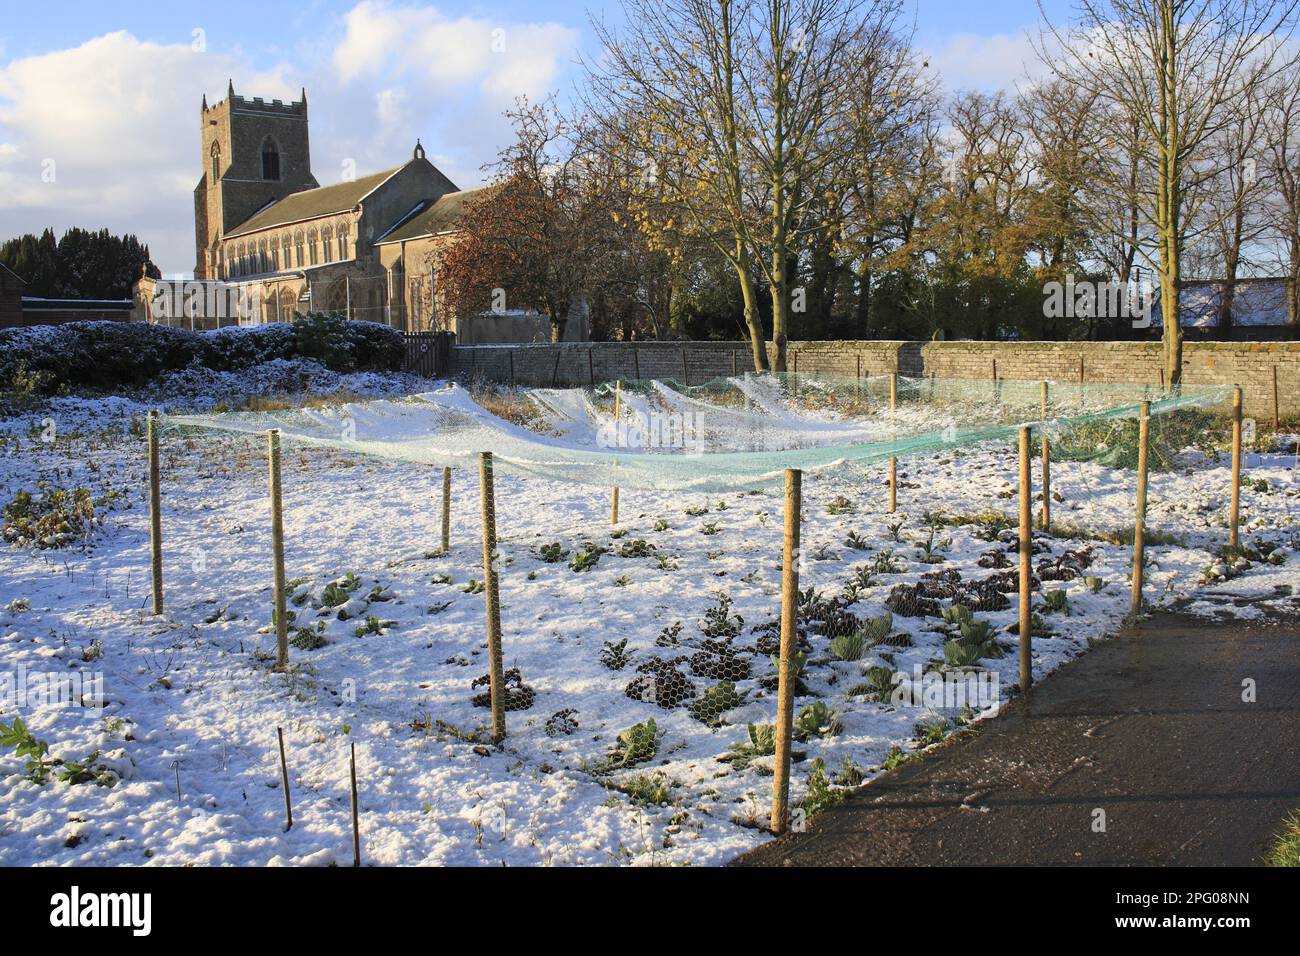 Brassicas under netting in snow covered village allotments, with church in background, St. Mary's Church, Bacton, Suffolk, England, United Kingdom Stock Photo